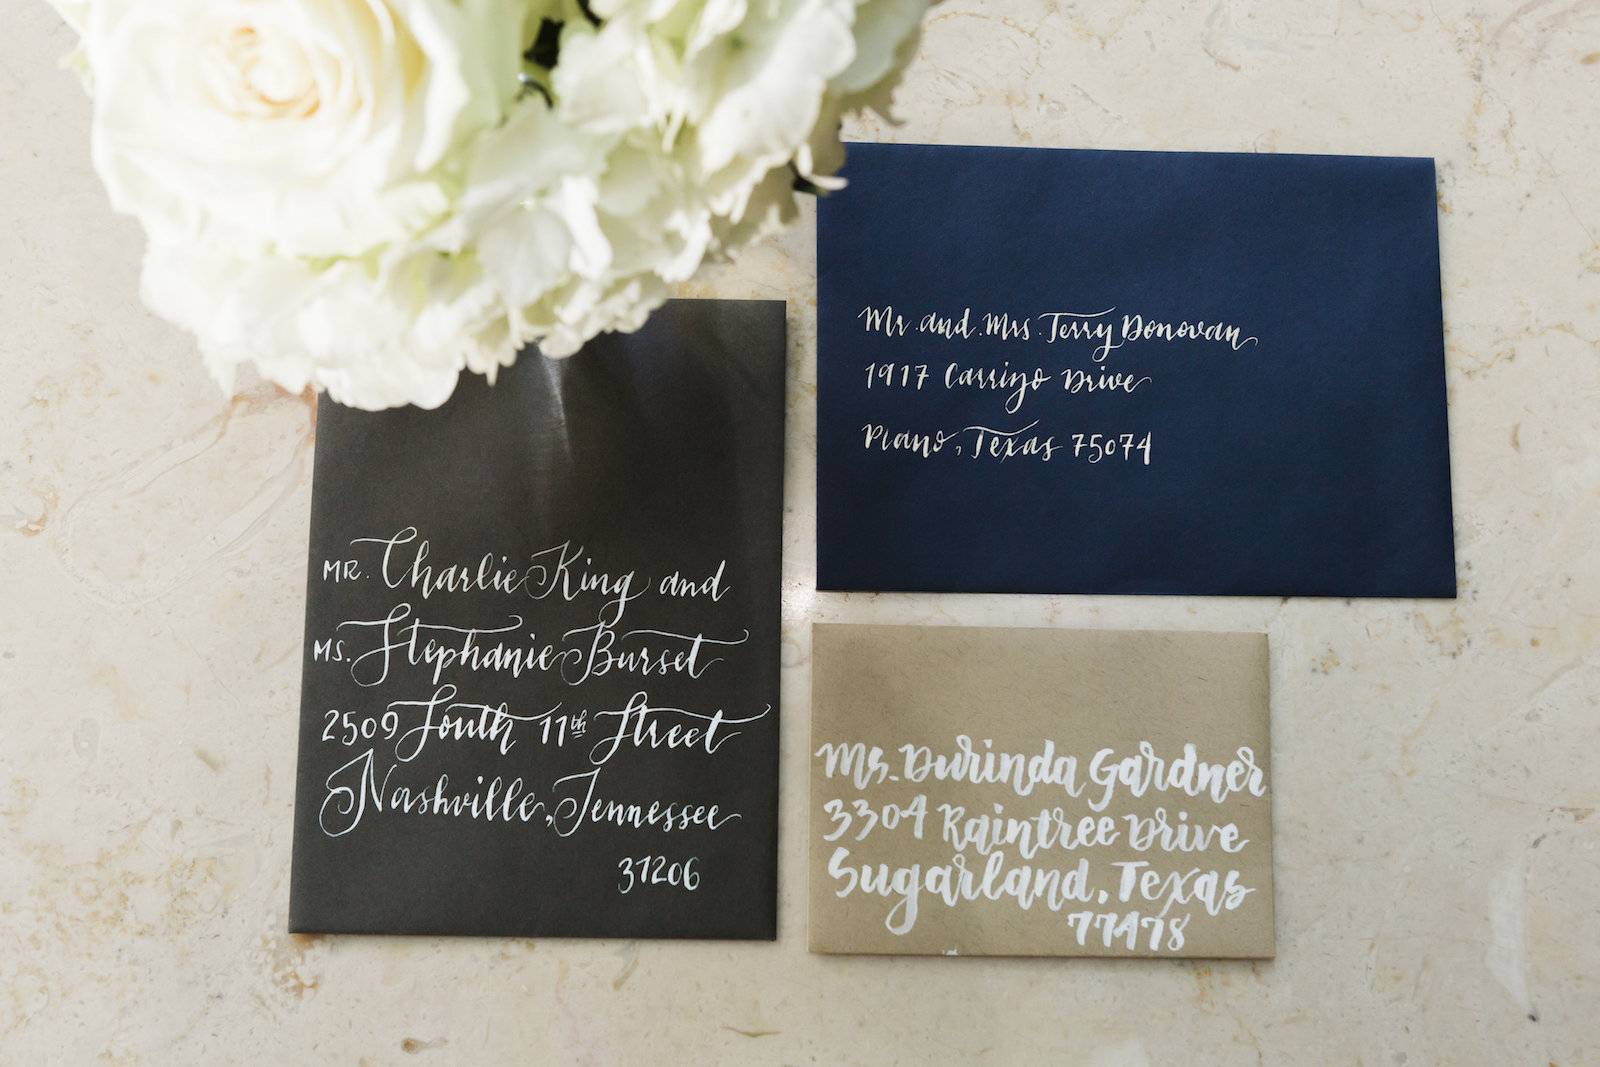 Crafted by Heart |  Nashville Calligraphy & Stationery